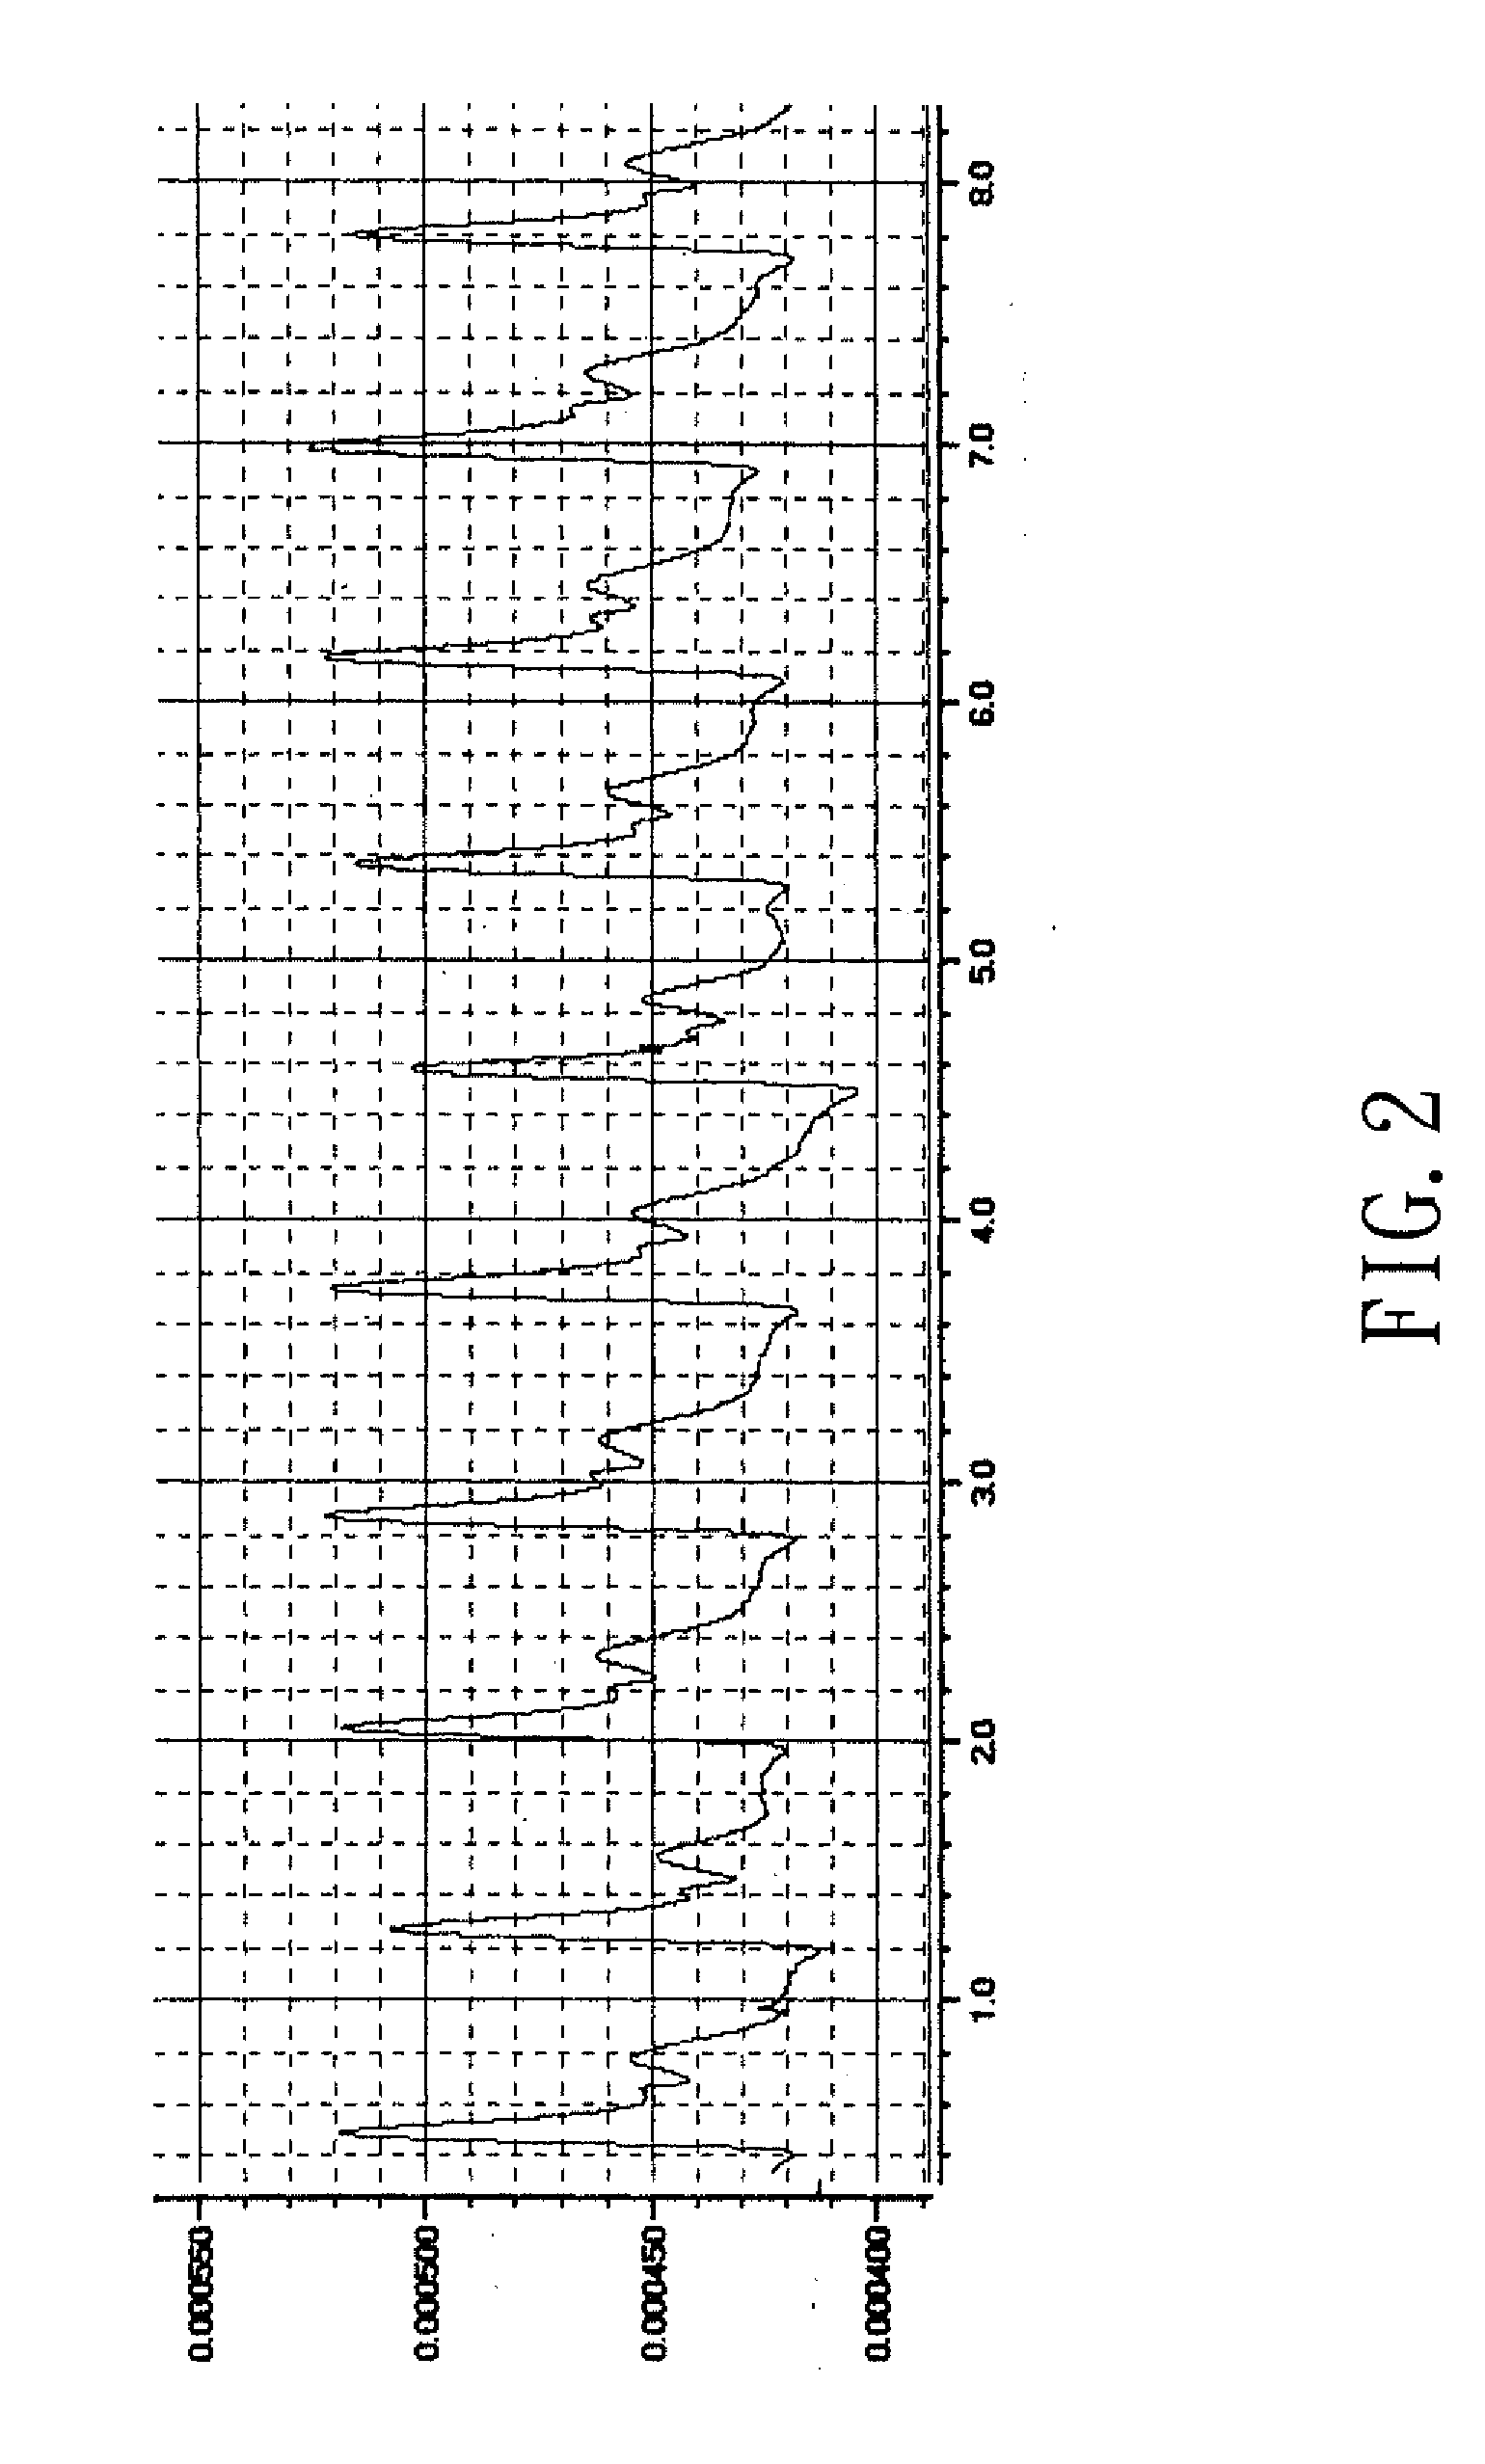 Pulse Taking and Spectral Analysis and Display Instrument